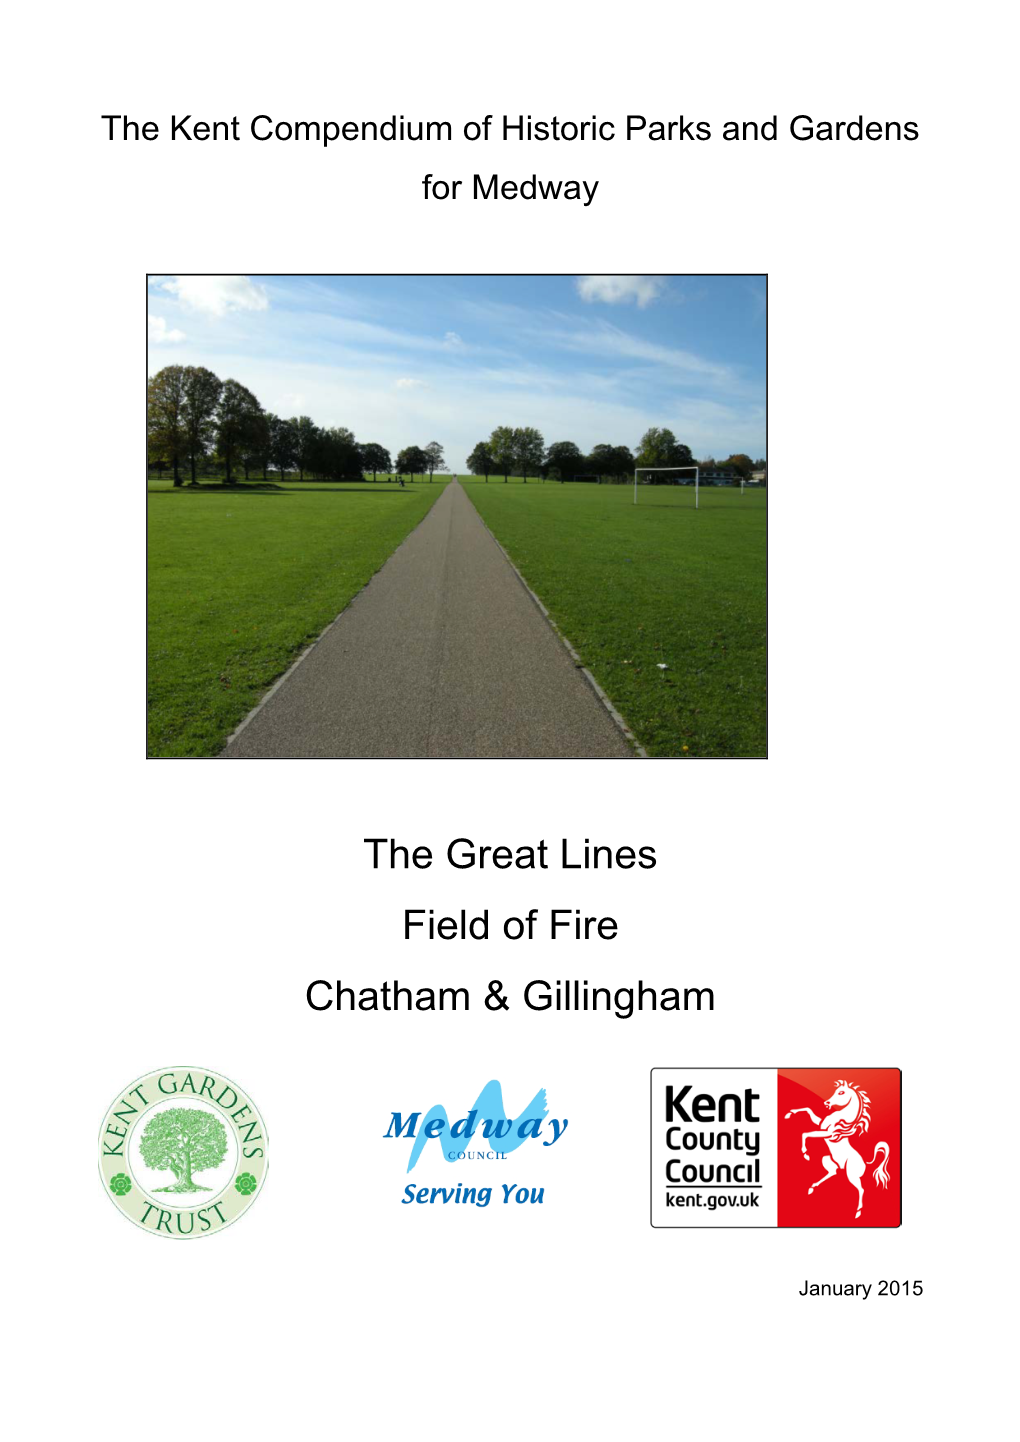 The Great Lines Field of Fire Chatham & Gillingham